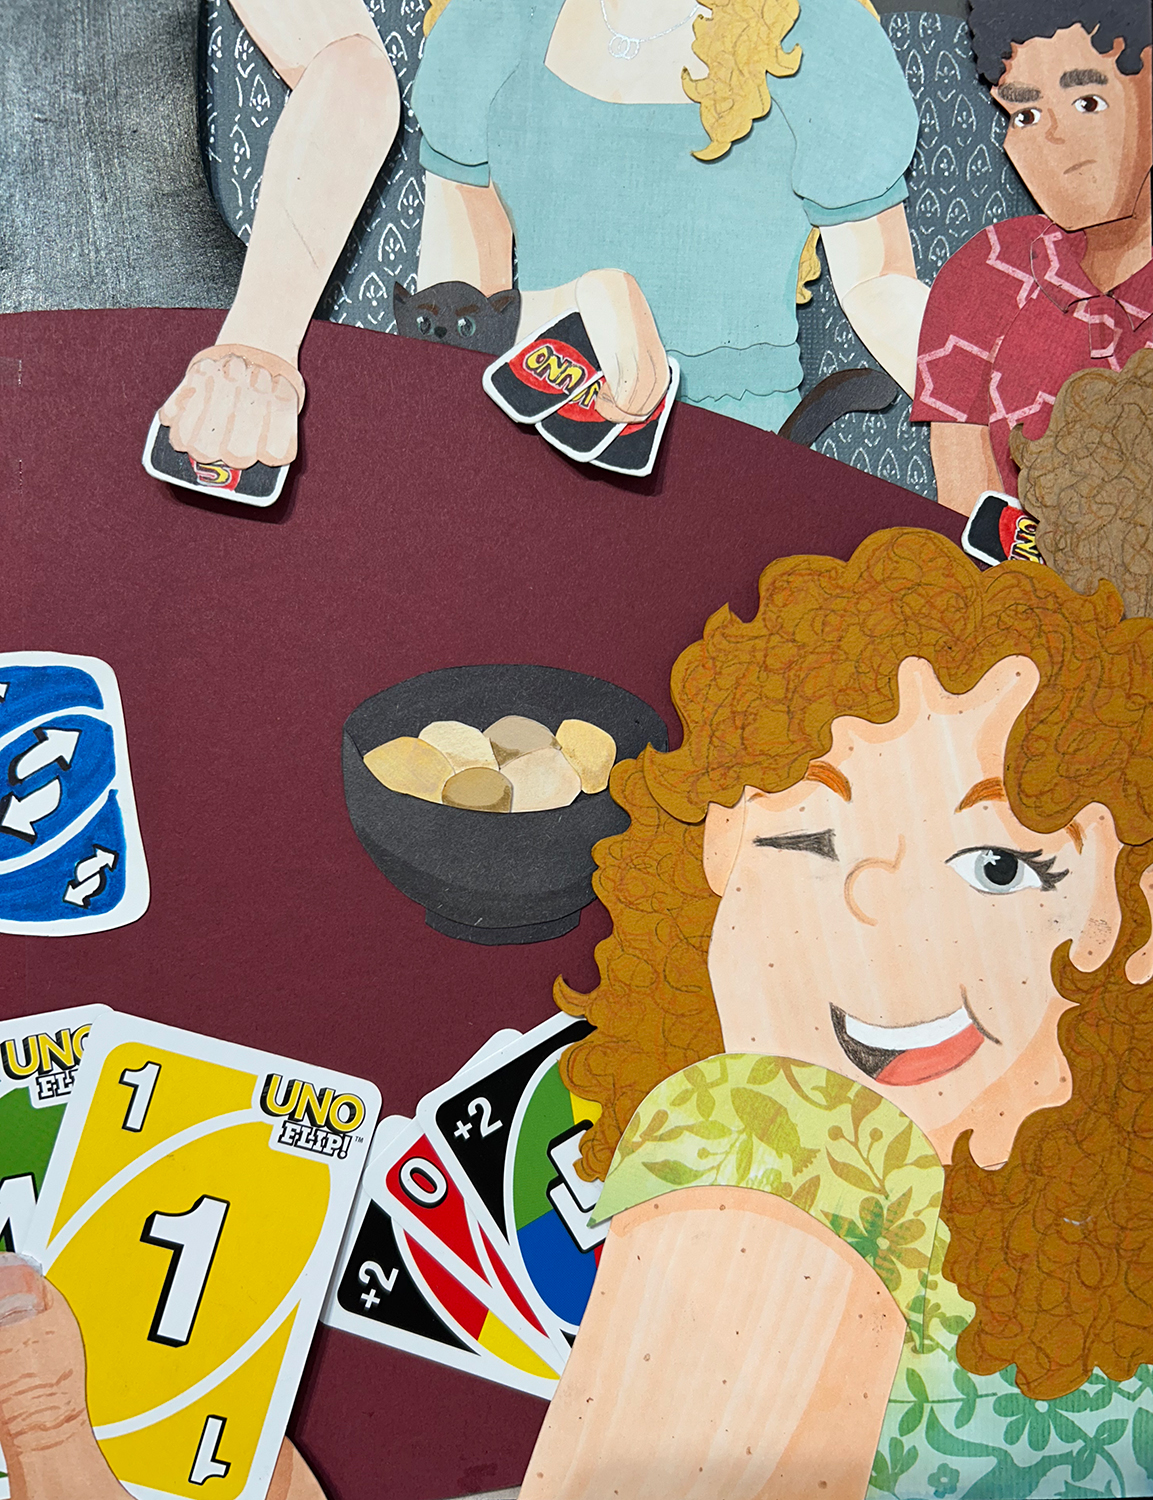 Image of a cut-paper scene. Four figures sit around a restaurant booth table playing UNO. The figure in the front right looks back at the viewer and winks.